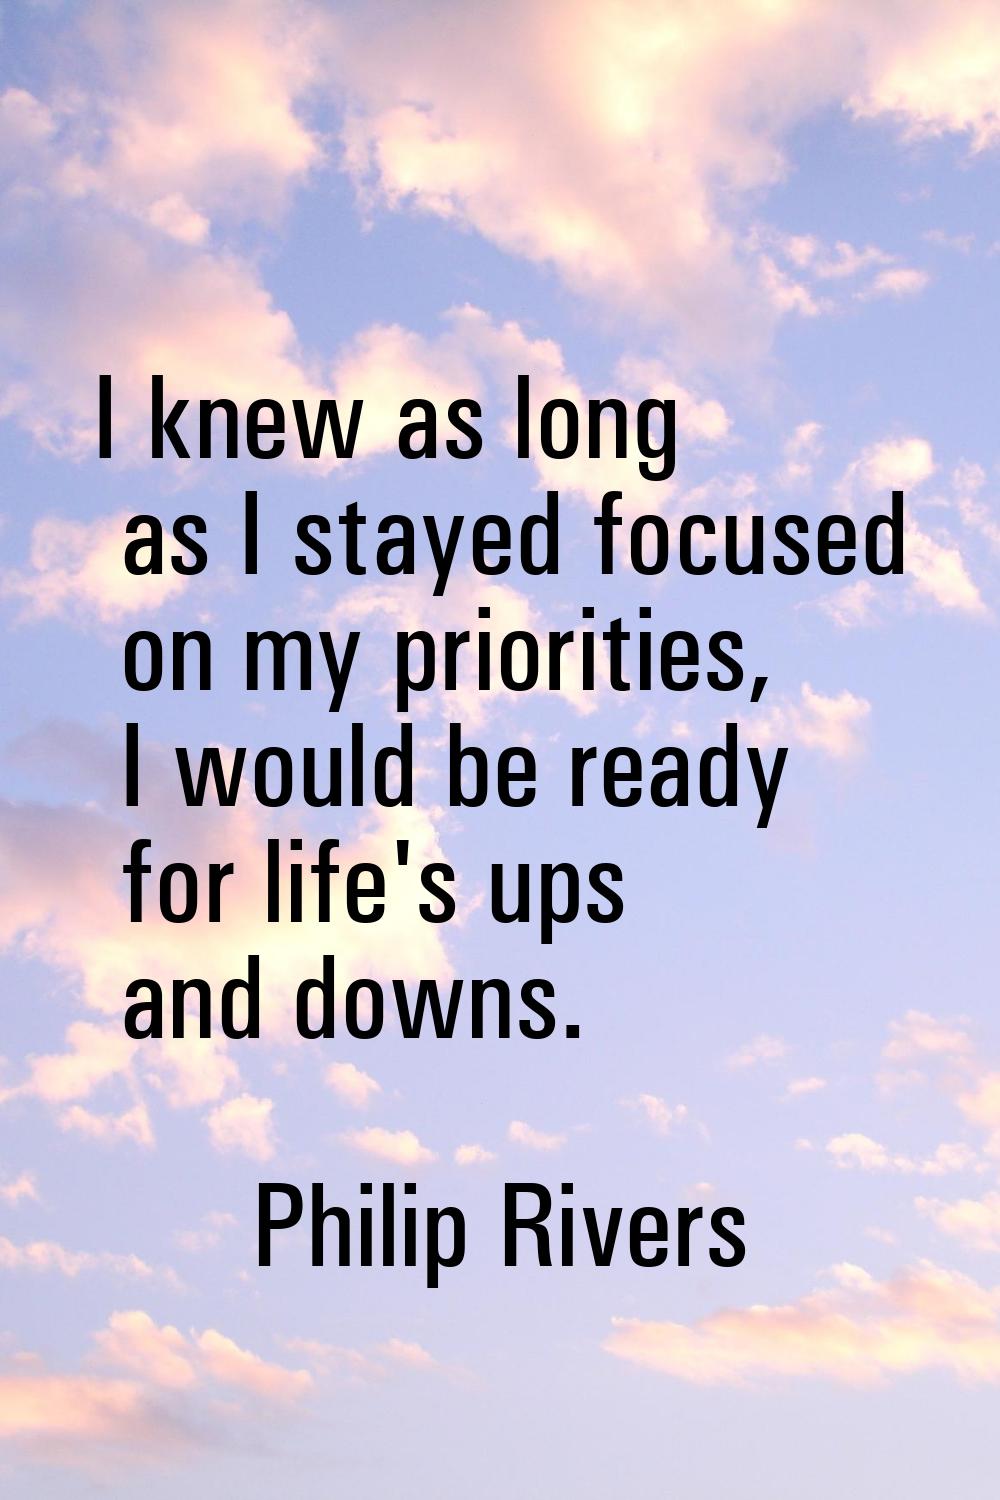 I knew as long as I stayed focused on my priorities, I would be ready for life's ups and downs.